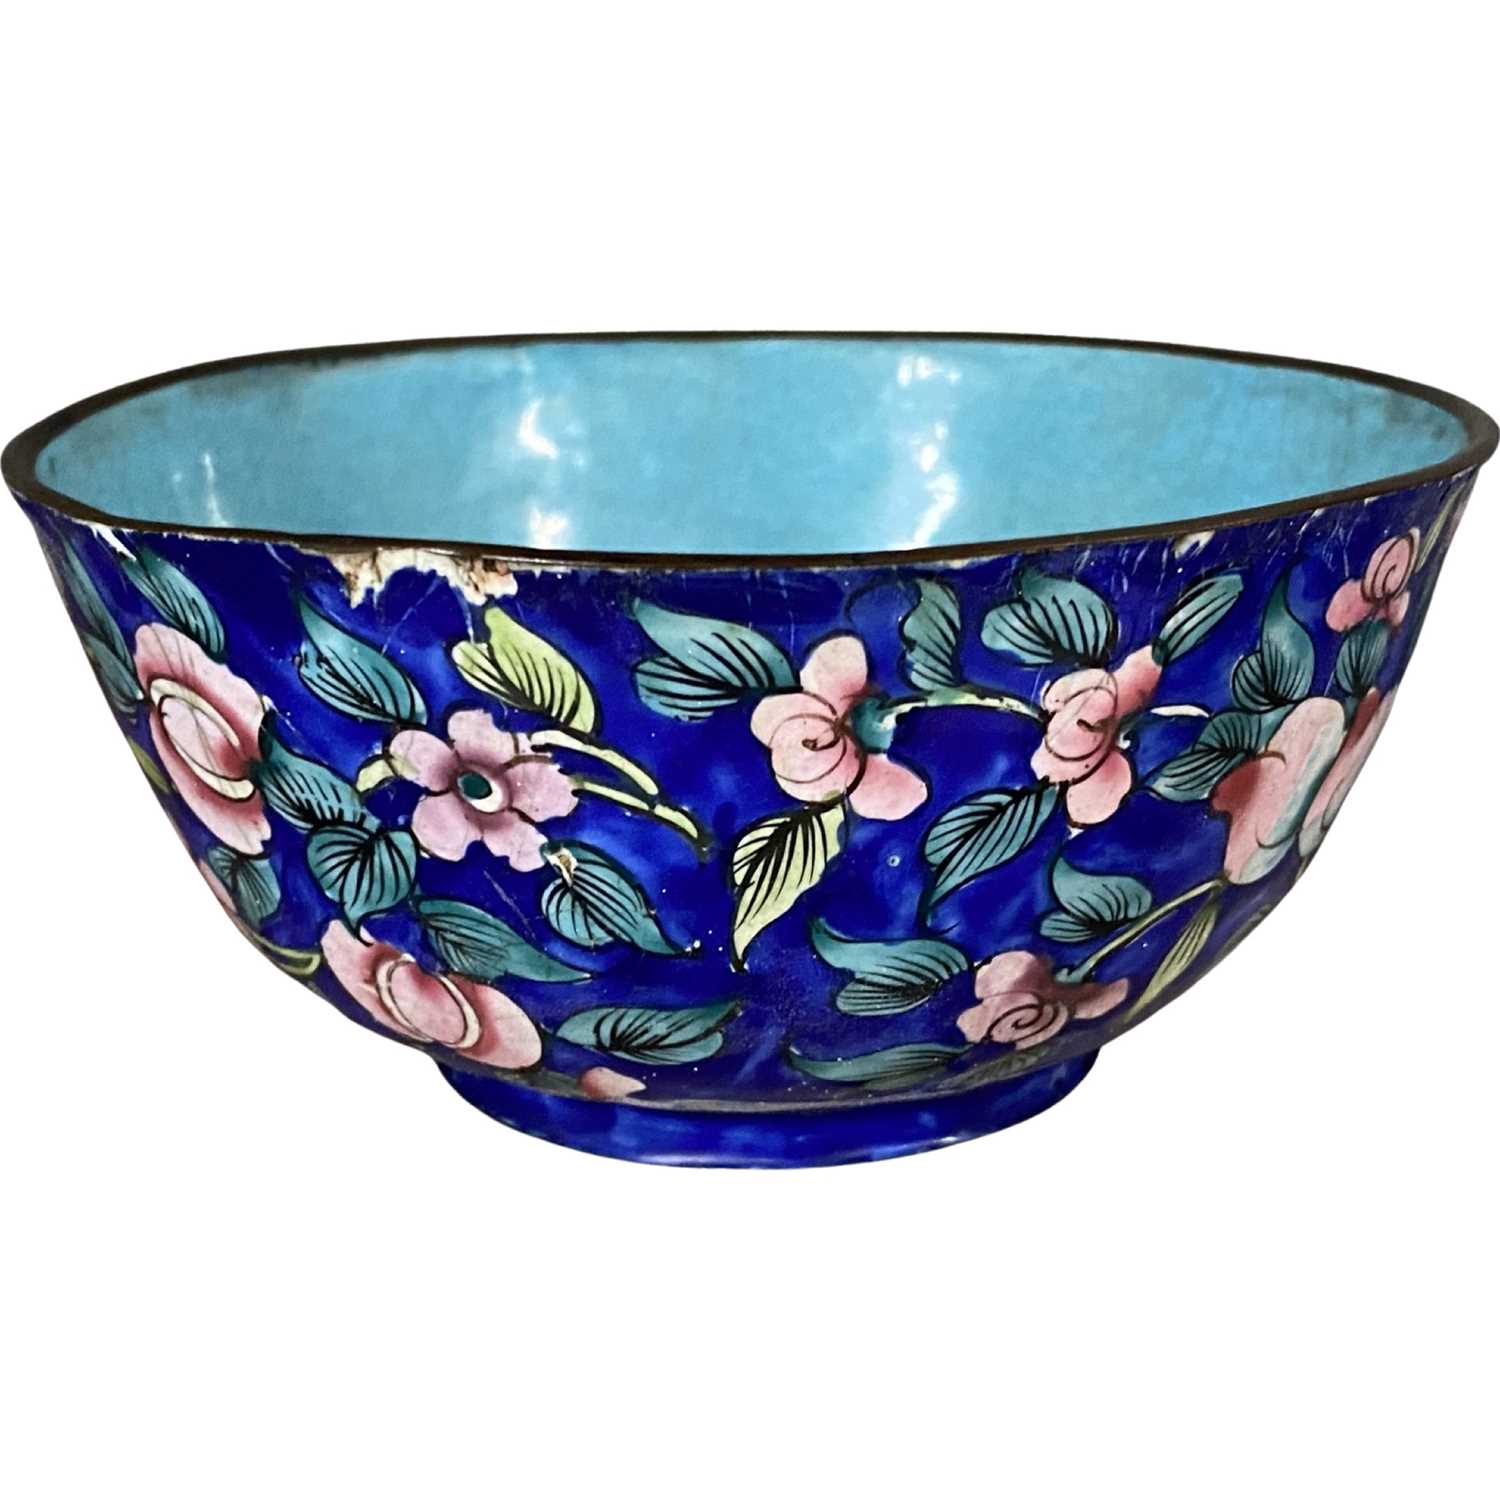 Small Chinese Cloisonne enamel bowl with floral decoration